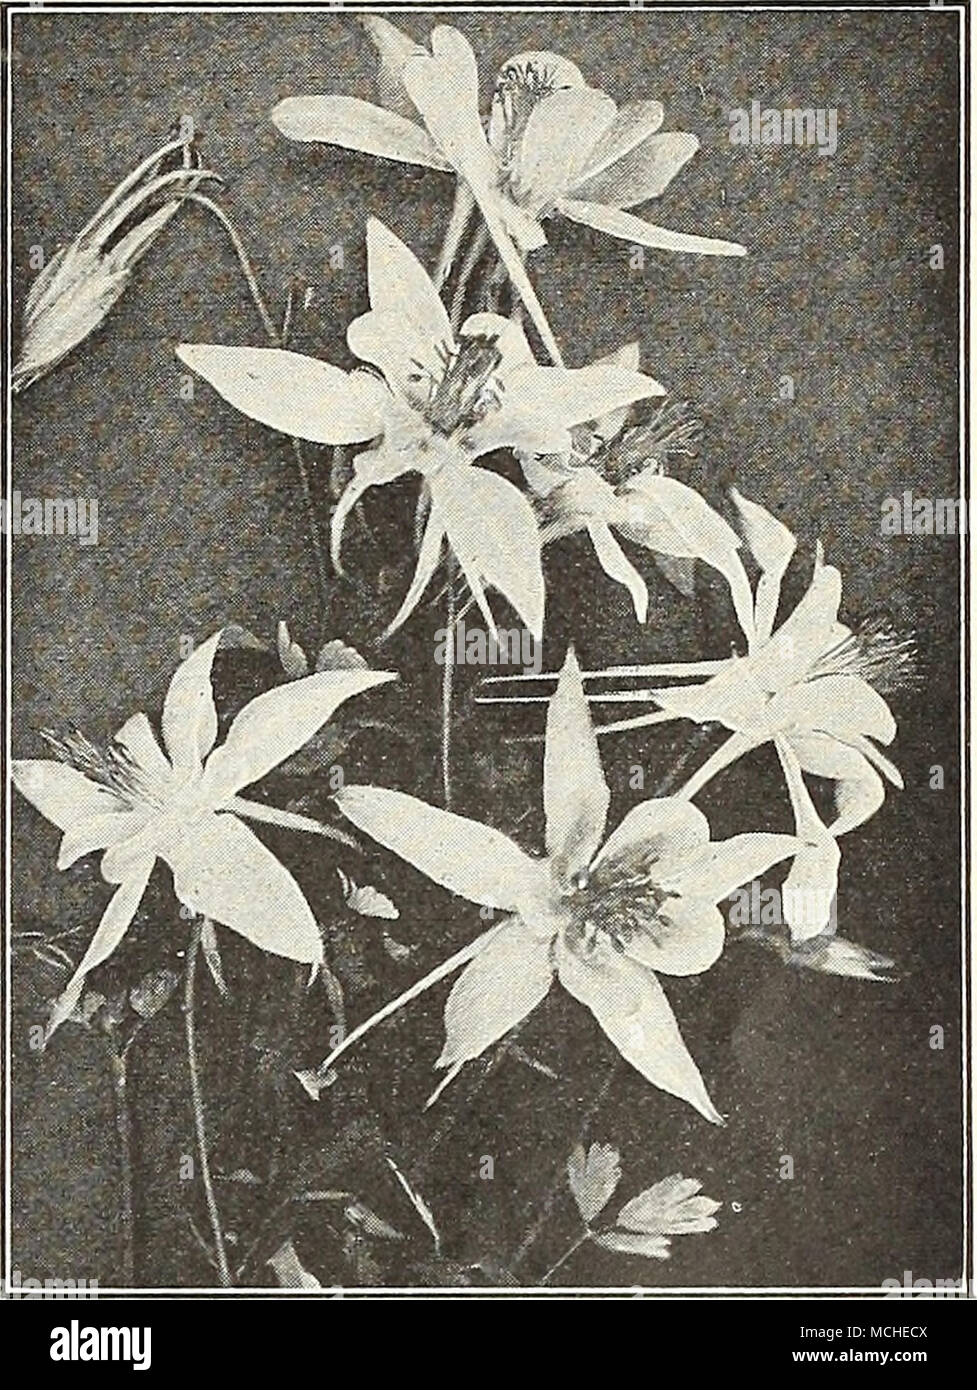 . Chrysantha (Golden Columbine). Bright yellow long-spurred flowers, Chrysantha Alba. A fine long-spurred white. Flabellata Nana Alba. A dwarf growing pure white. Skinneri. Petals yellow with long red spurs. Vulgaris. The European violet-blue columbine. Price. 30 cts. each; $2.50 per doz.; $18.00 per 100. One each of the 8 sorts for $1.65. Dreer's Long-spurred Aquilegia or Columbine AsclepiaS (Butterfly Weed) Tuberosa. Very showy native plants, about 2^ feet high, pro- ducing flowers of brilliant orange-scarlet during July and August. 25 cts. each; $2.50 per doz.; $15.00 per 100. Arabis (Rock  Stock Photo